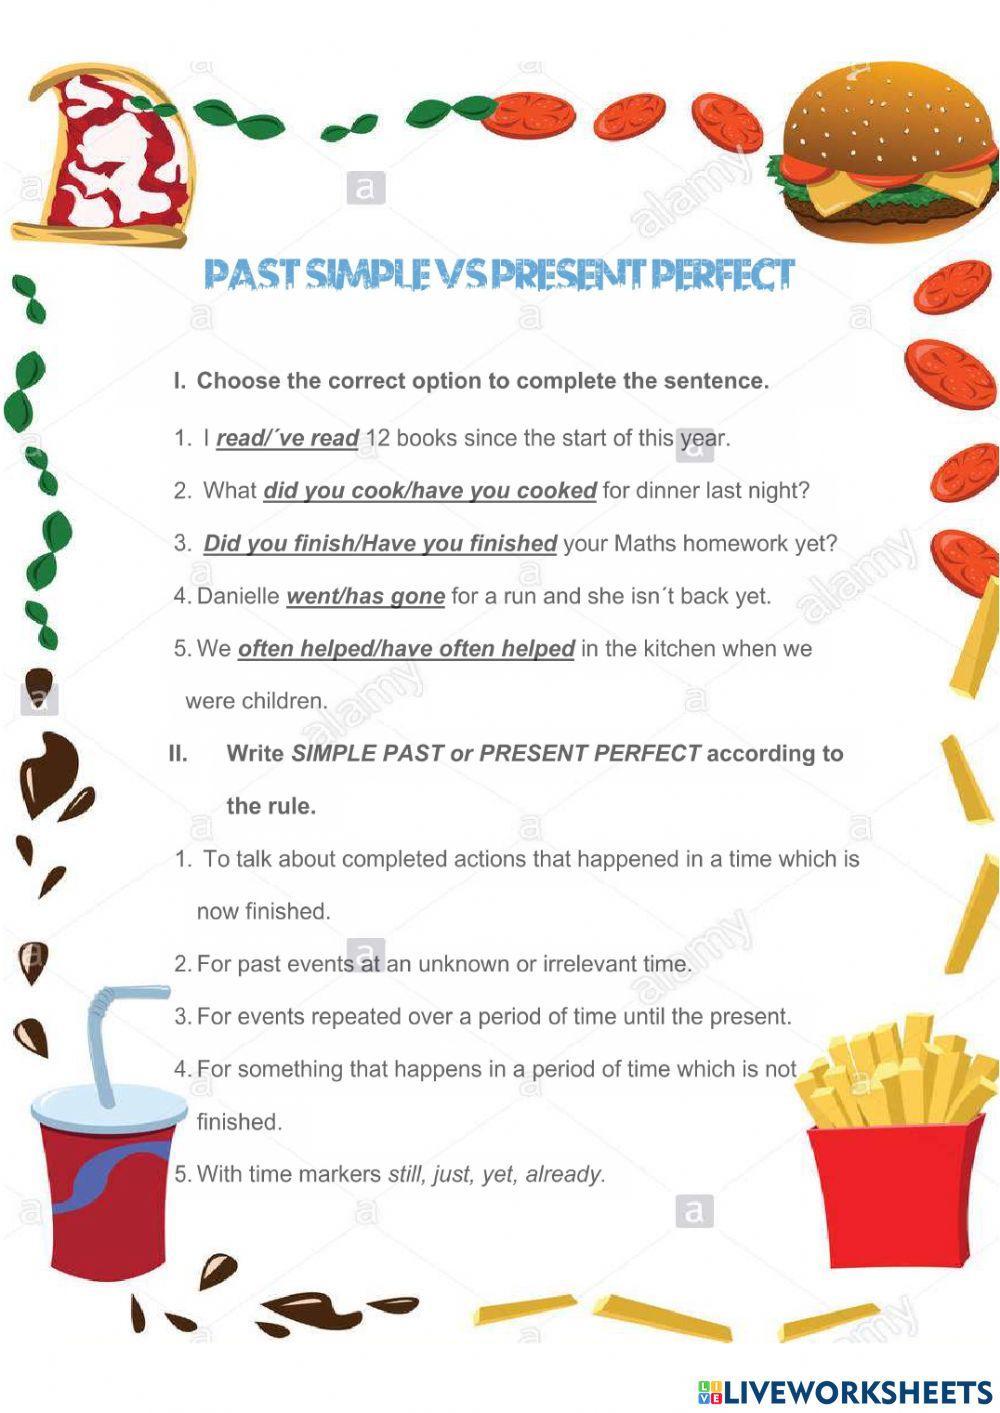 Past simple and Present Perfect